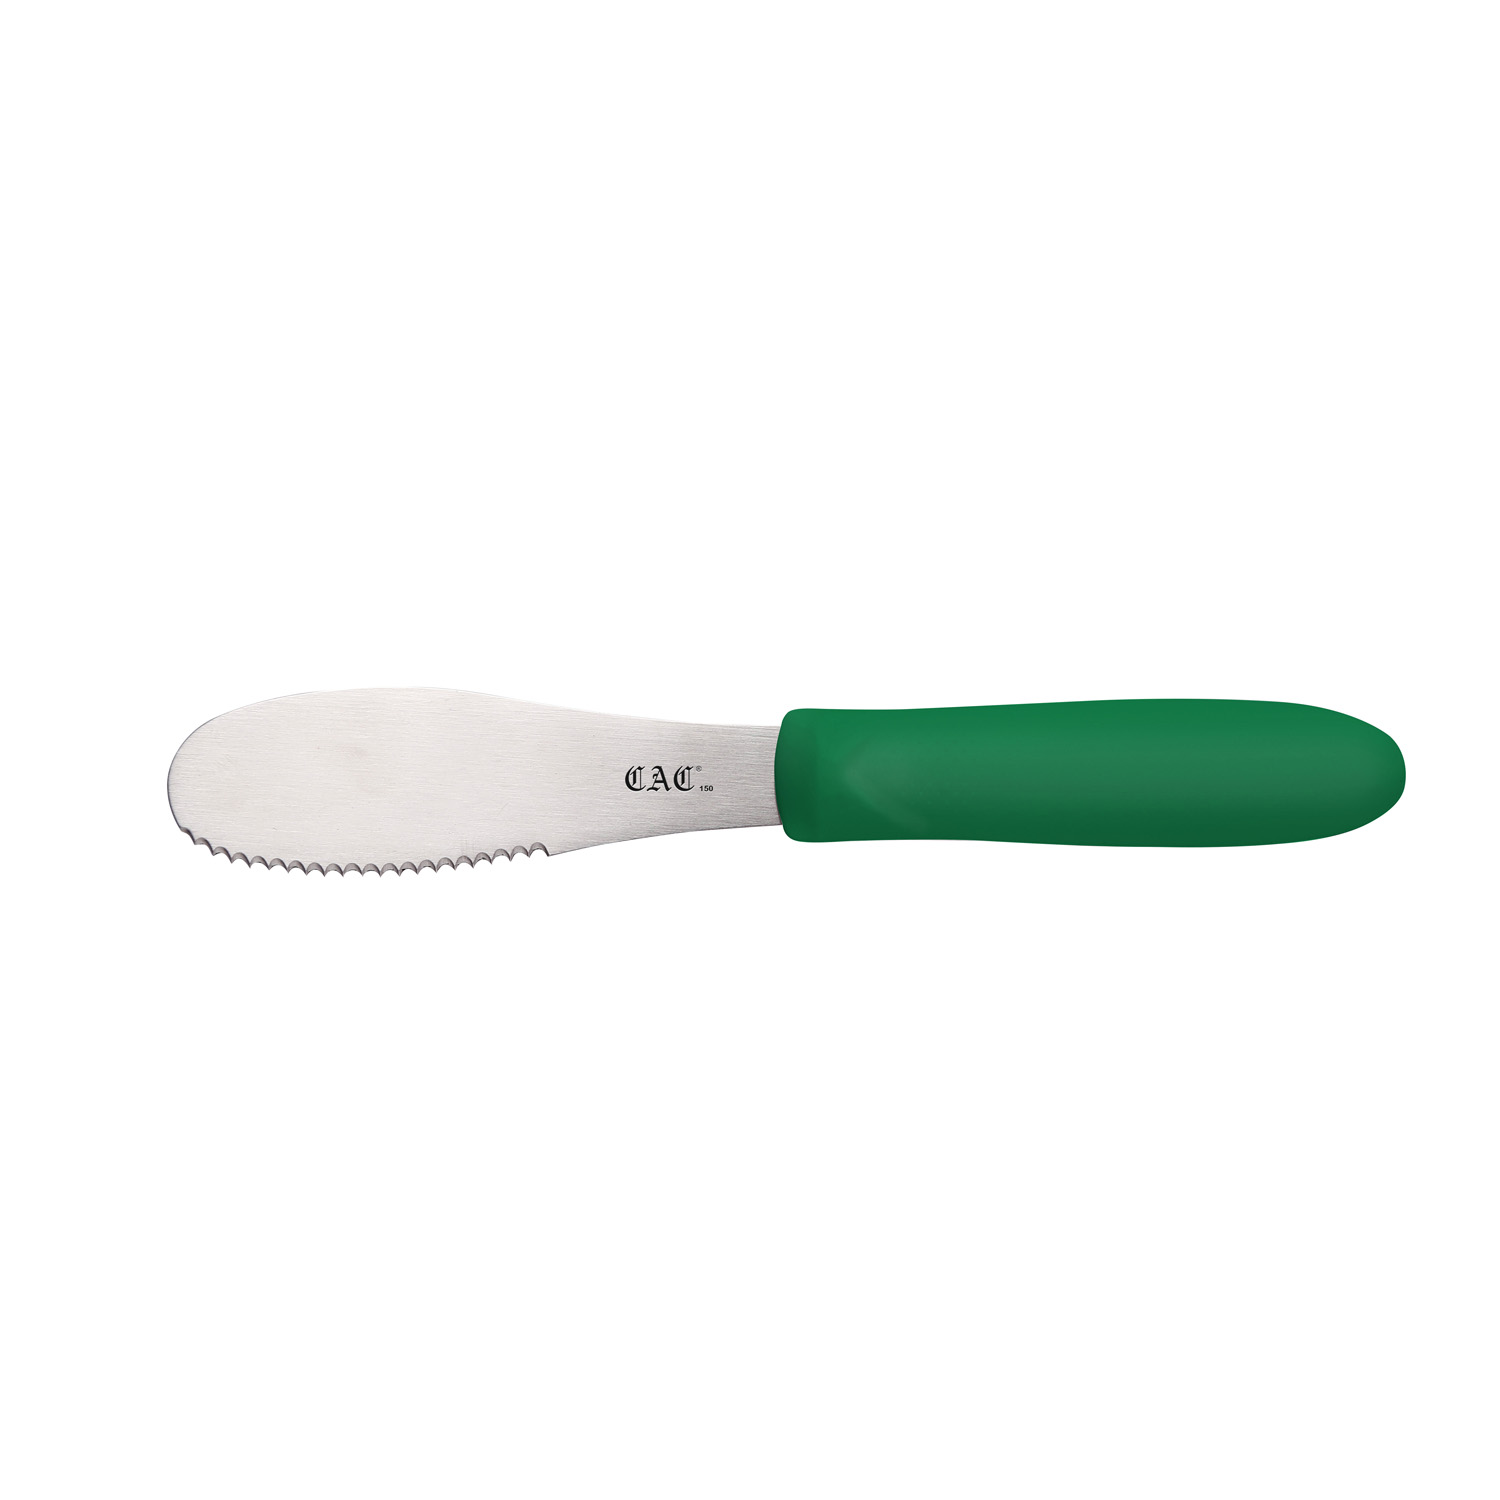 CAC China SPSP-4GN Green Serrated Spreader with Plastic Handle 3-7/8"